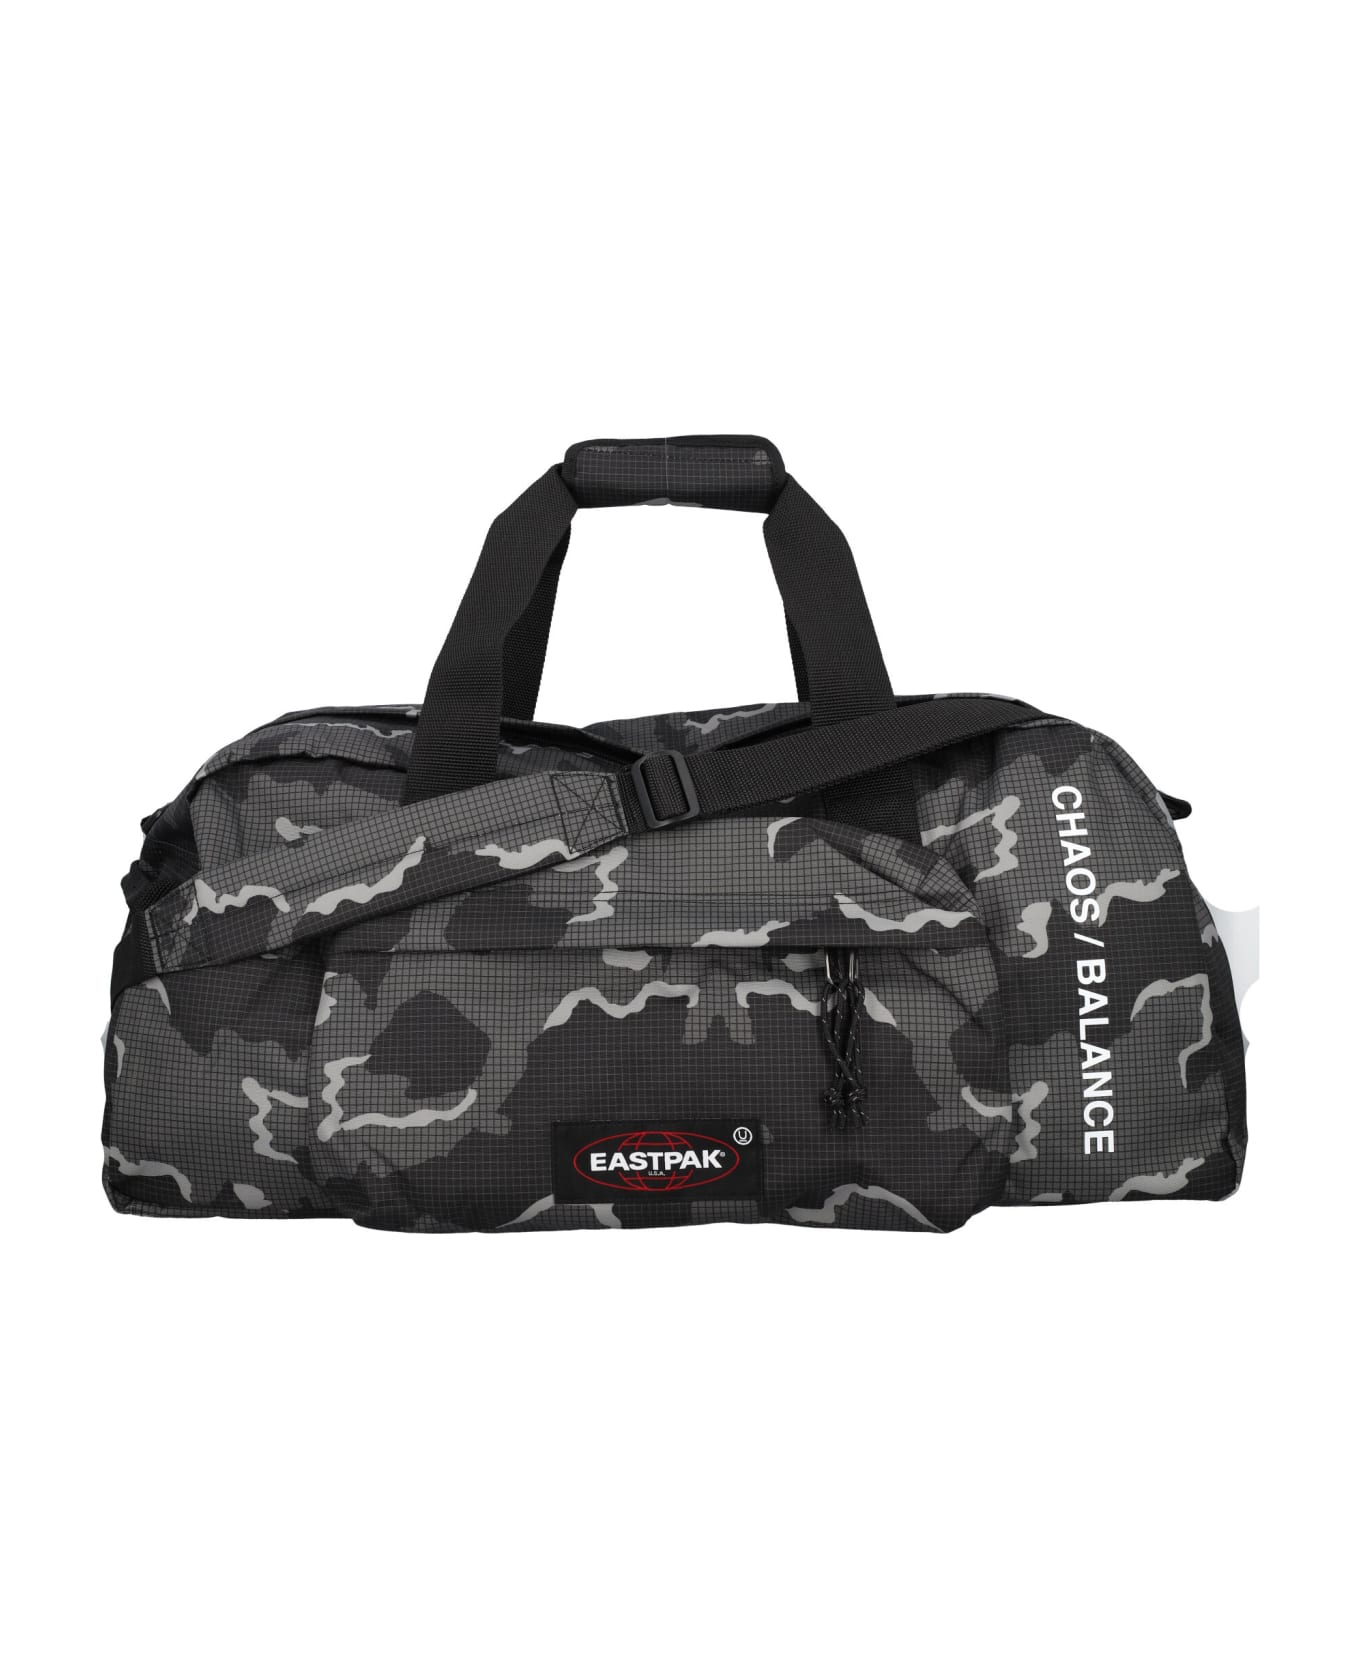 Eastpak Stand+ Undercover - BLACK CAMO